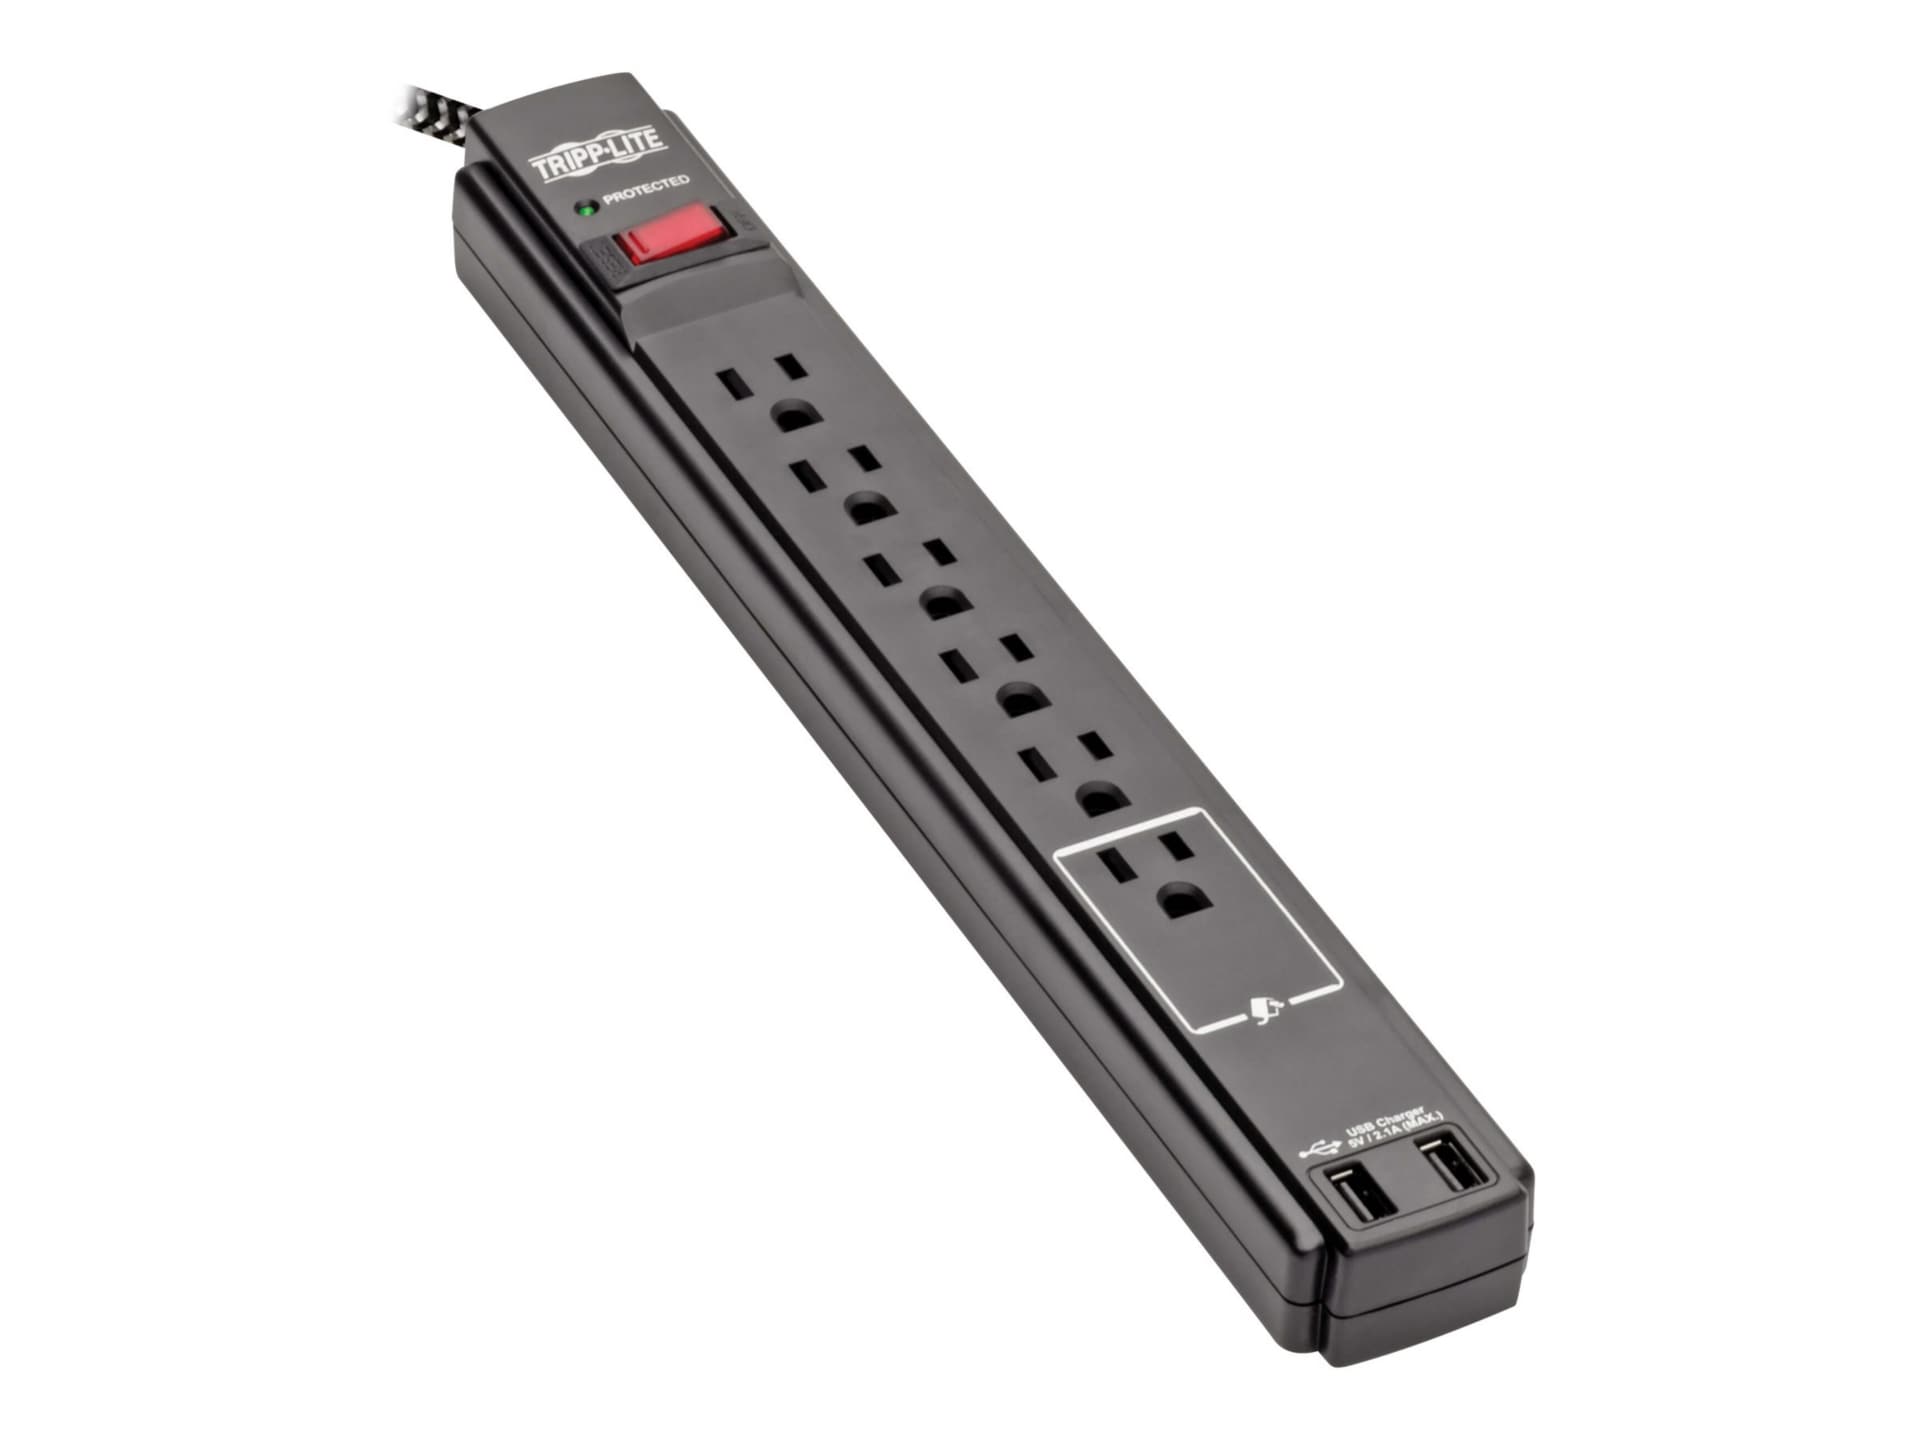 Tripp Lite Safe-IT Surge Protector - 6-Outlet 2 USB Ports, 10 ft. Cord, 5-15P Plug, 990 Joules, Antimicrobial